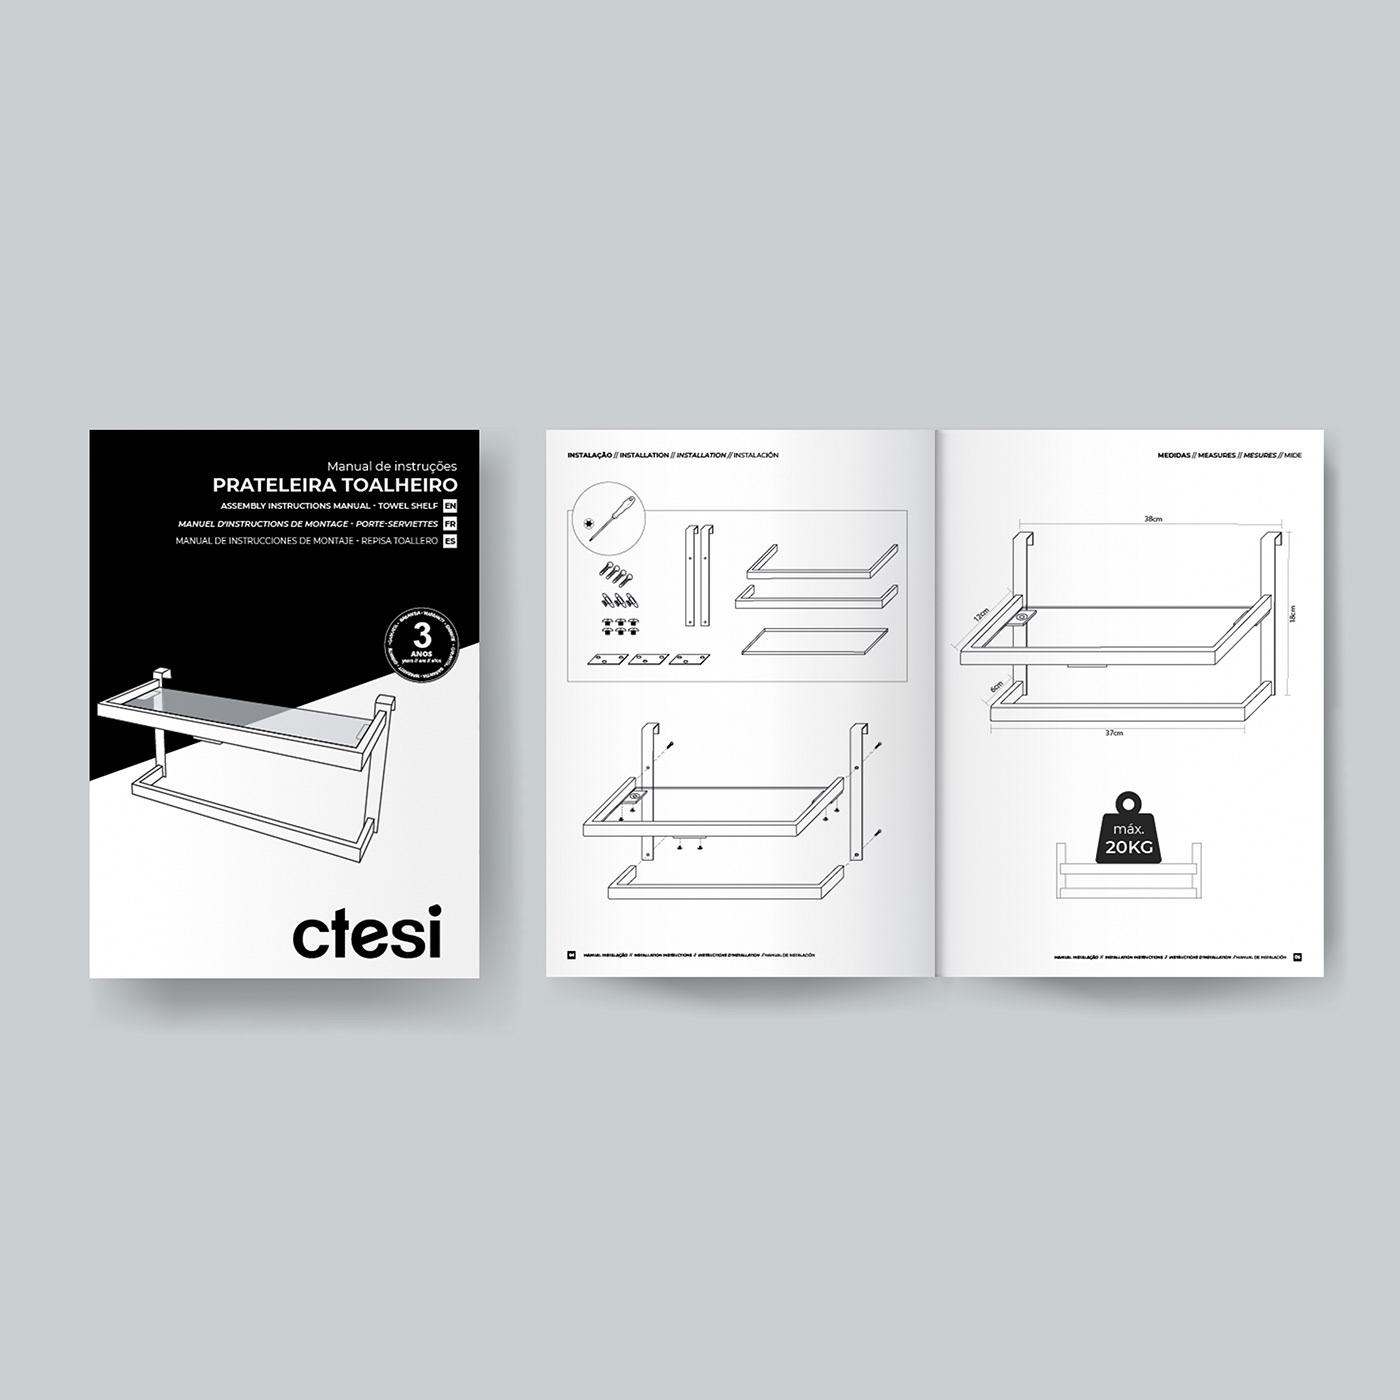 information design infographic instruction manual instructions User Guide manual